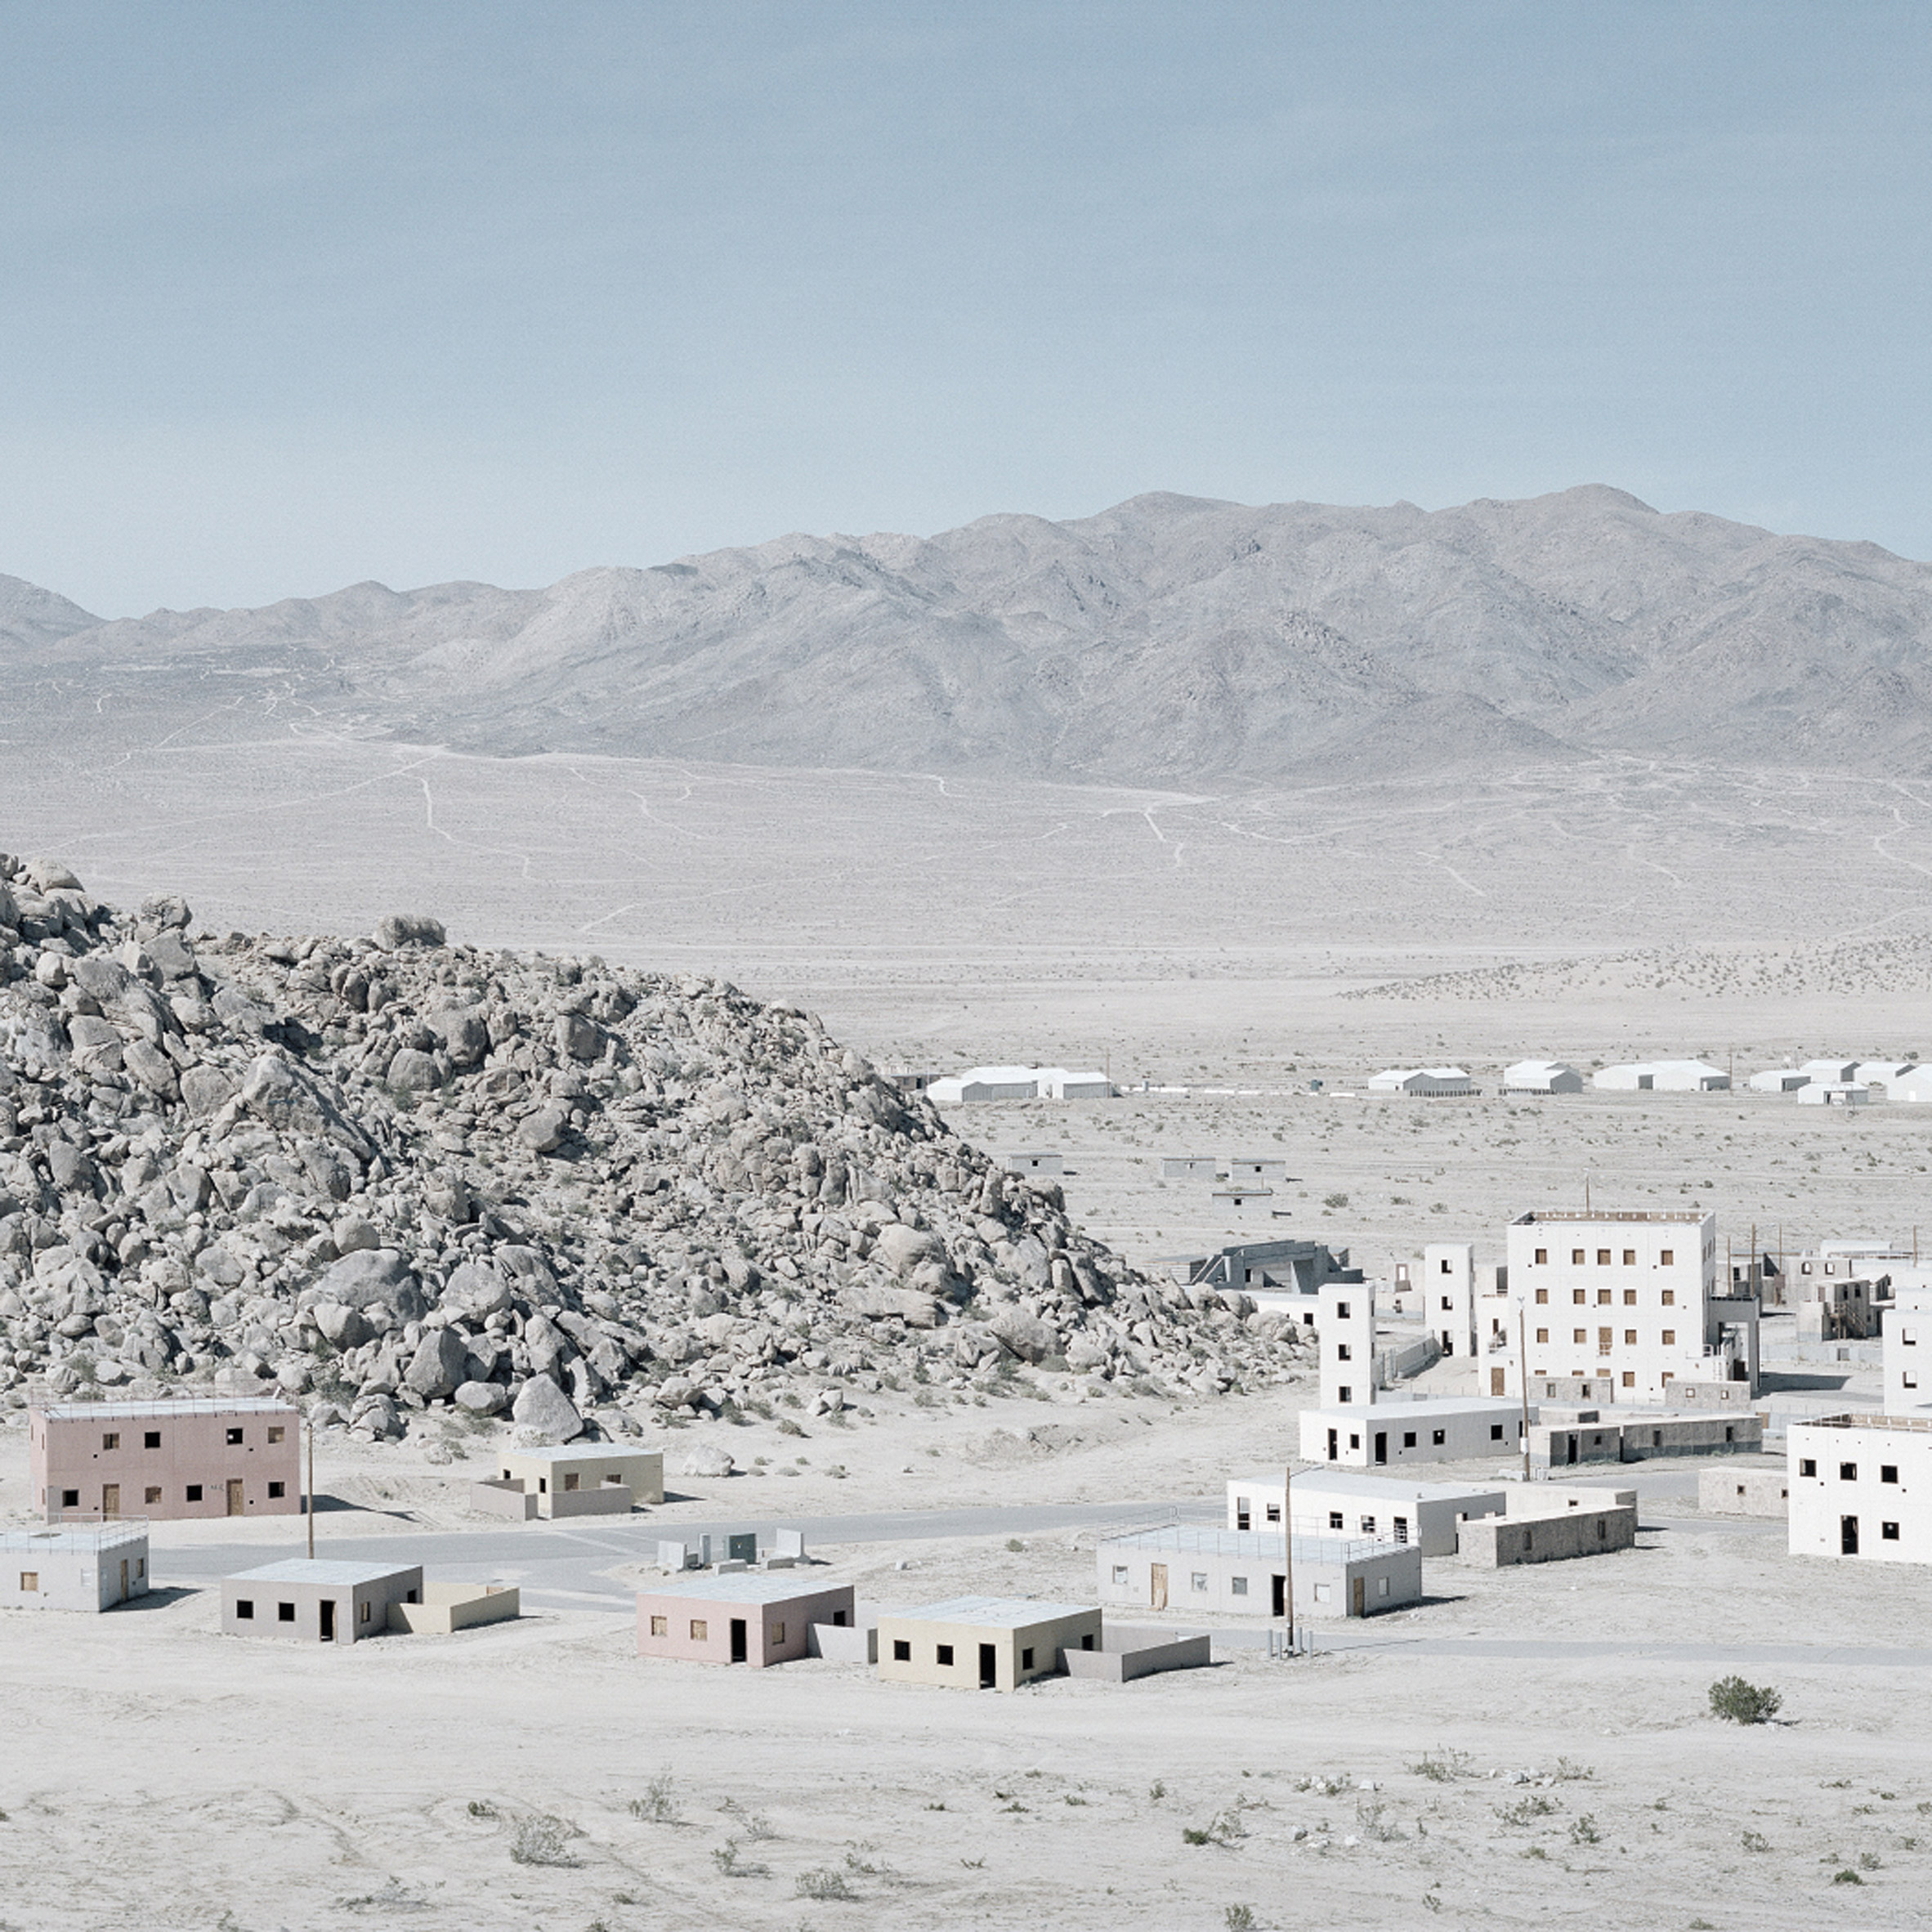 Gregor Sailer depicts fake cities in The Potemkin Village photography